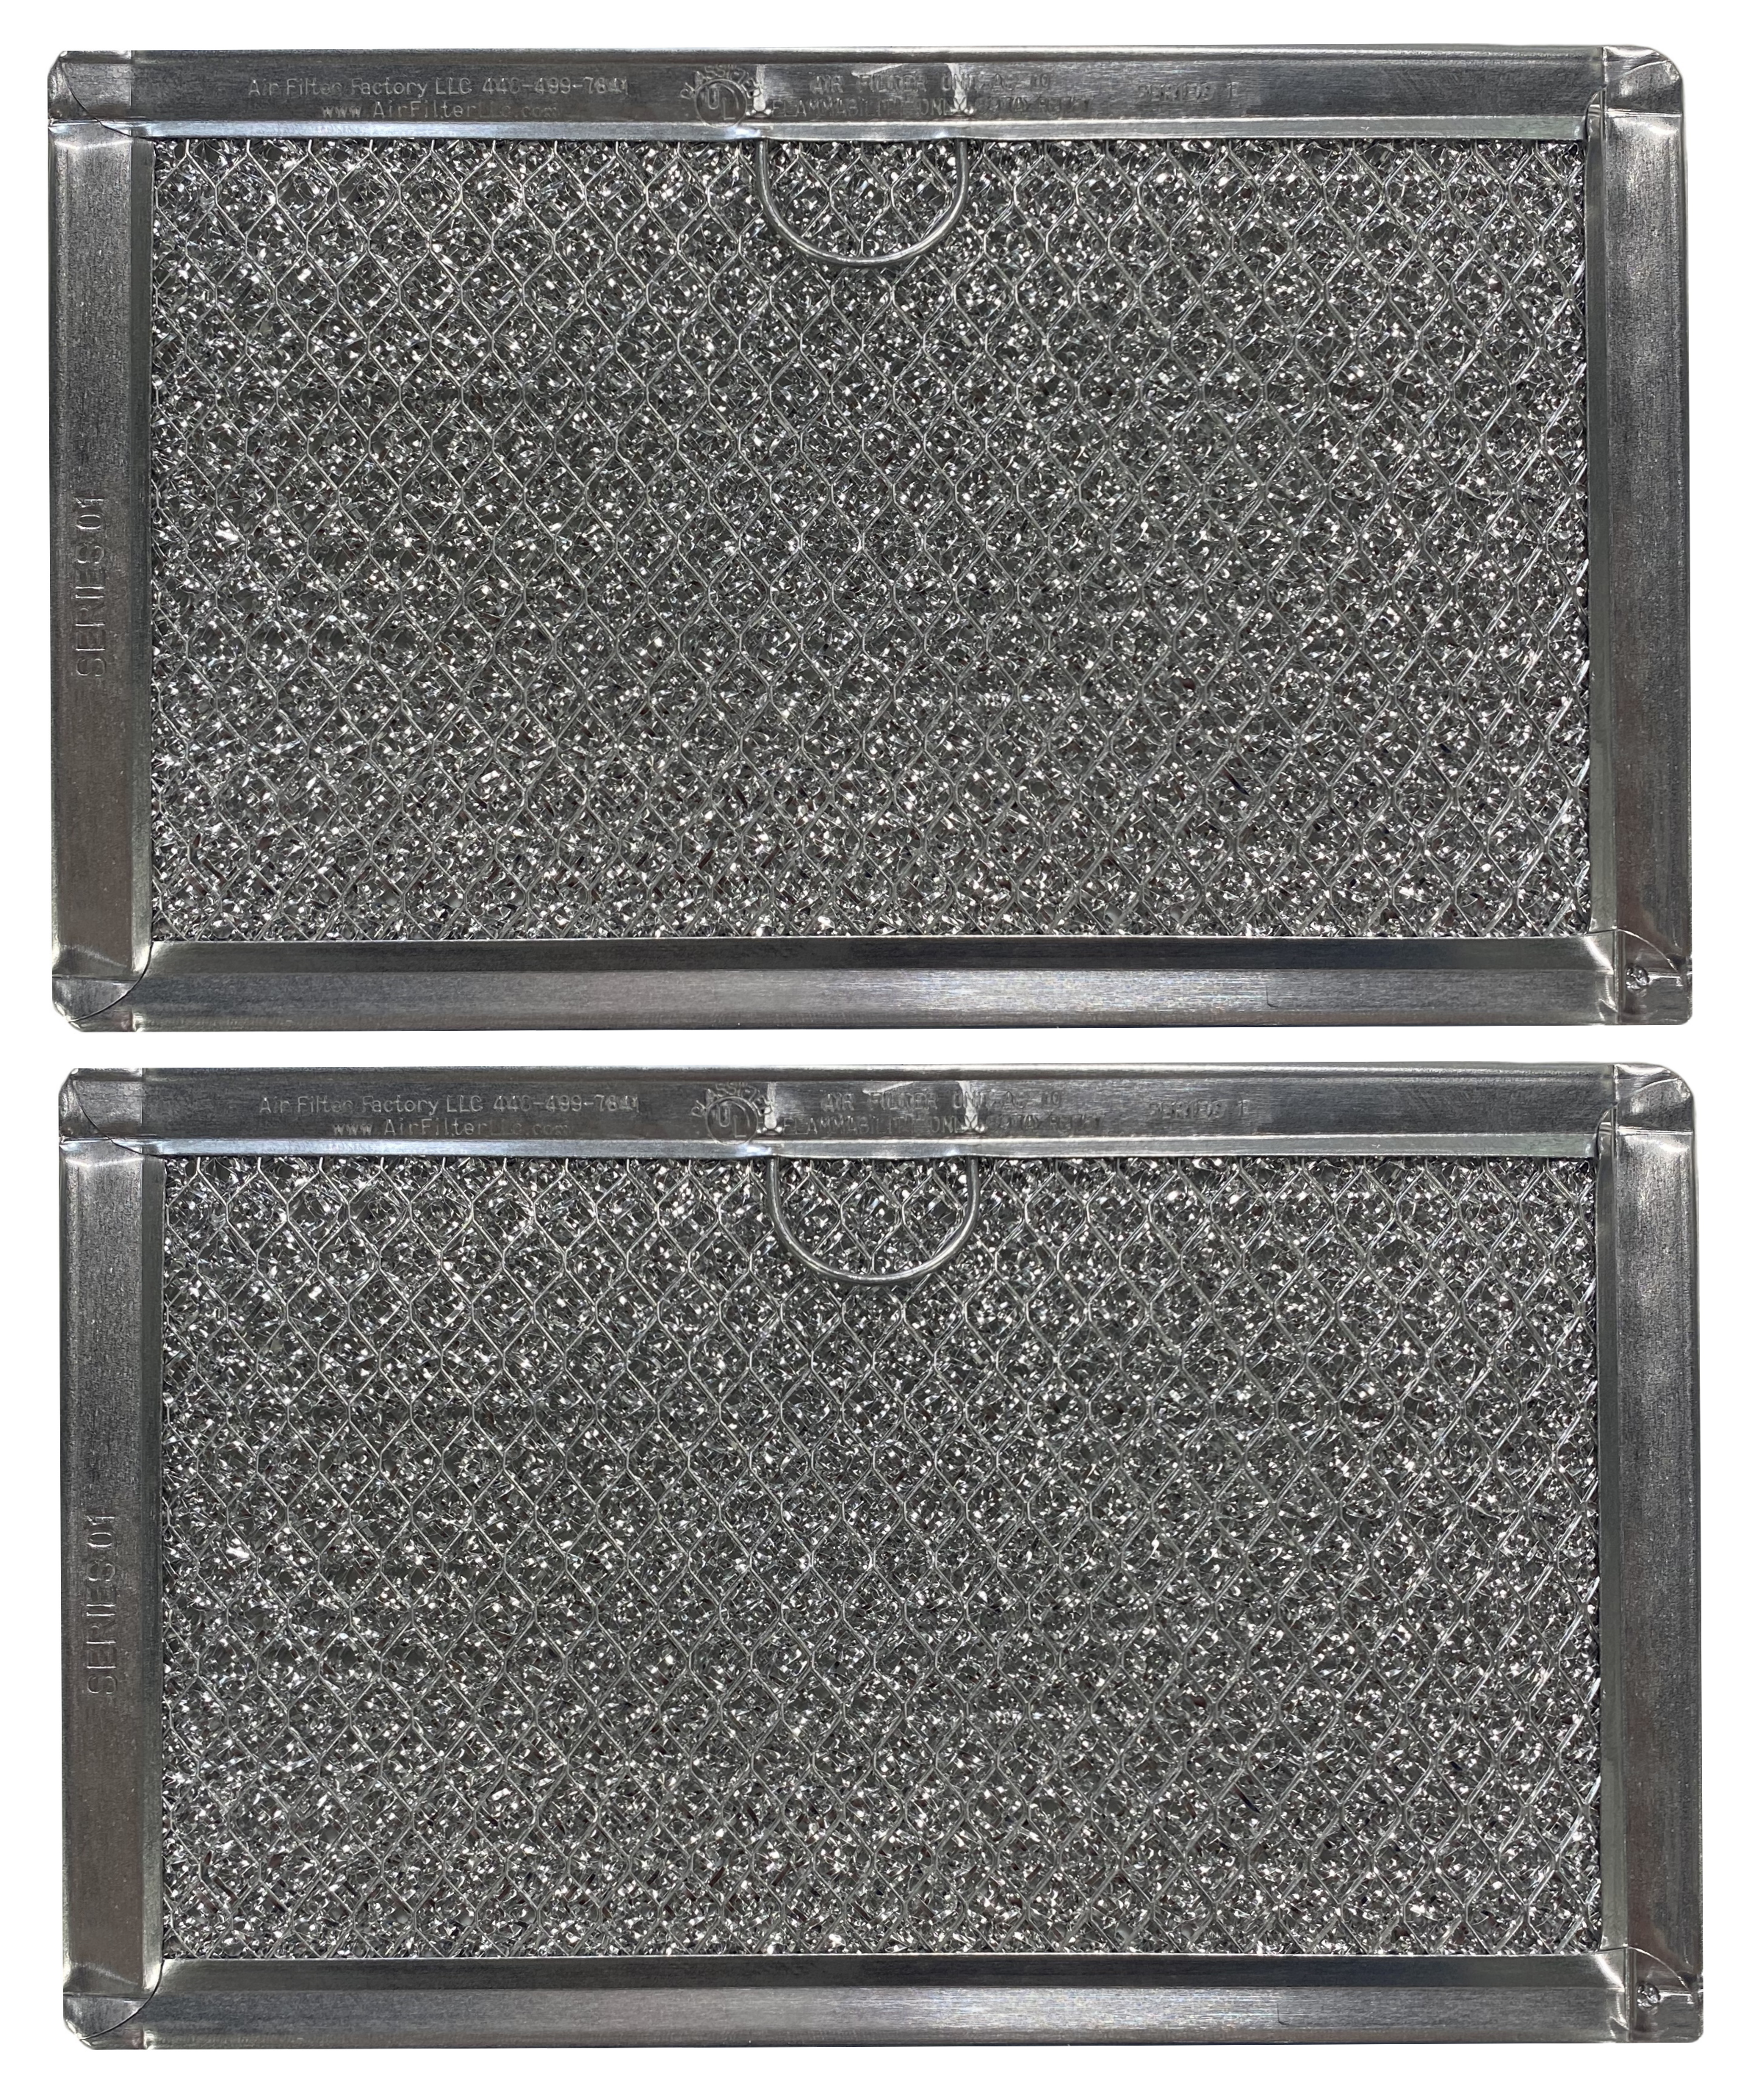 2 Pack) Compatible For HMV8052U/01 Grease Filters - Microwave Oven Range  Filters For Kitchen Appliances